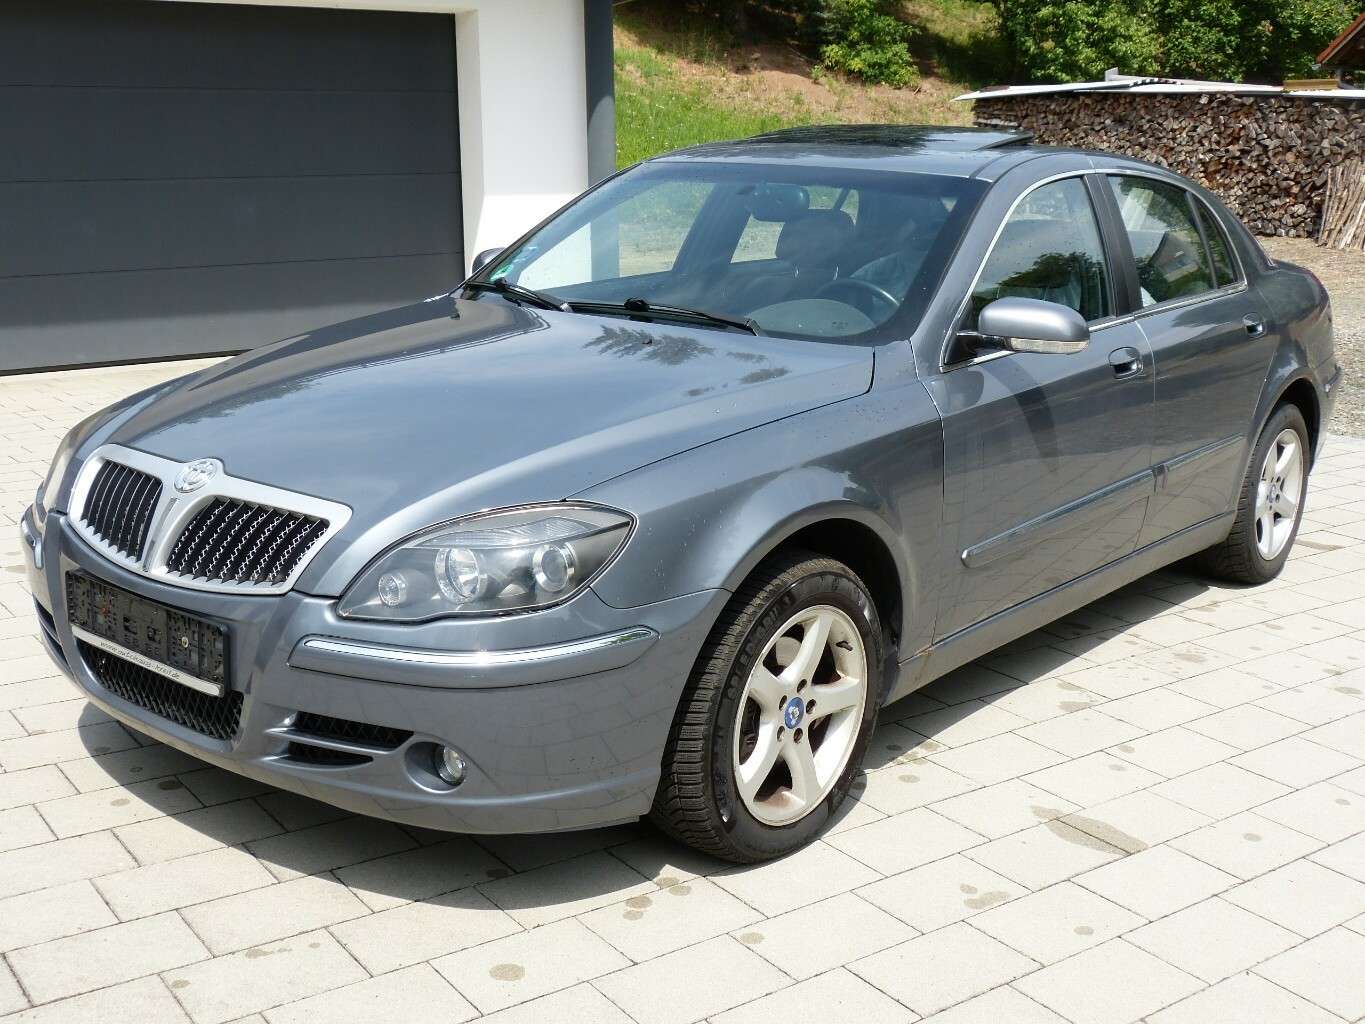 Brilliance BS4 Sedan in Grey used in Oberviechtach for € 1,699.-